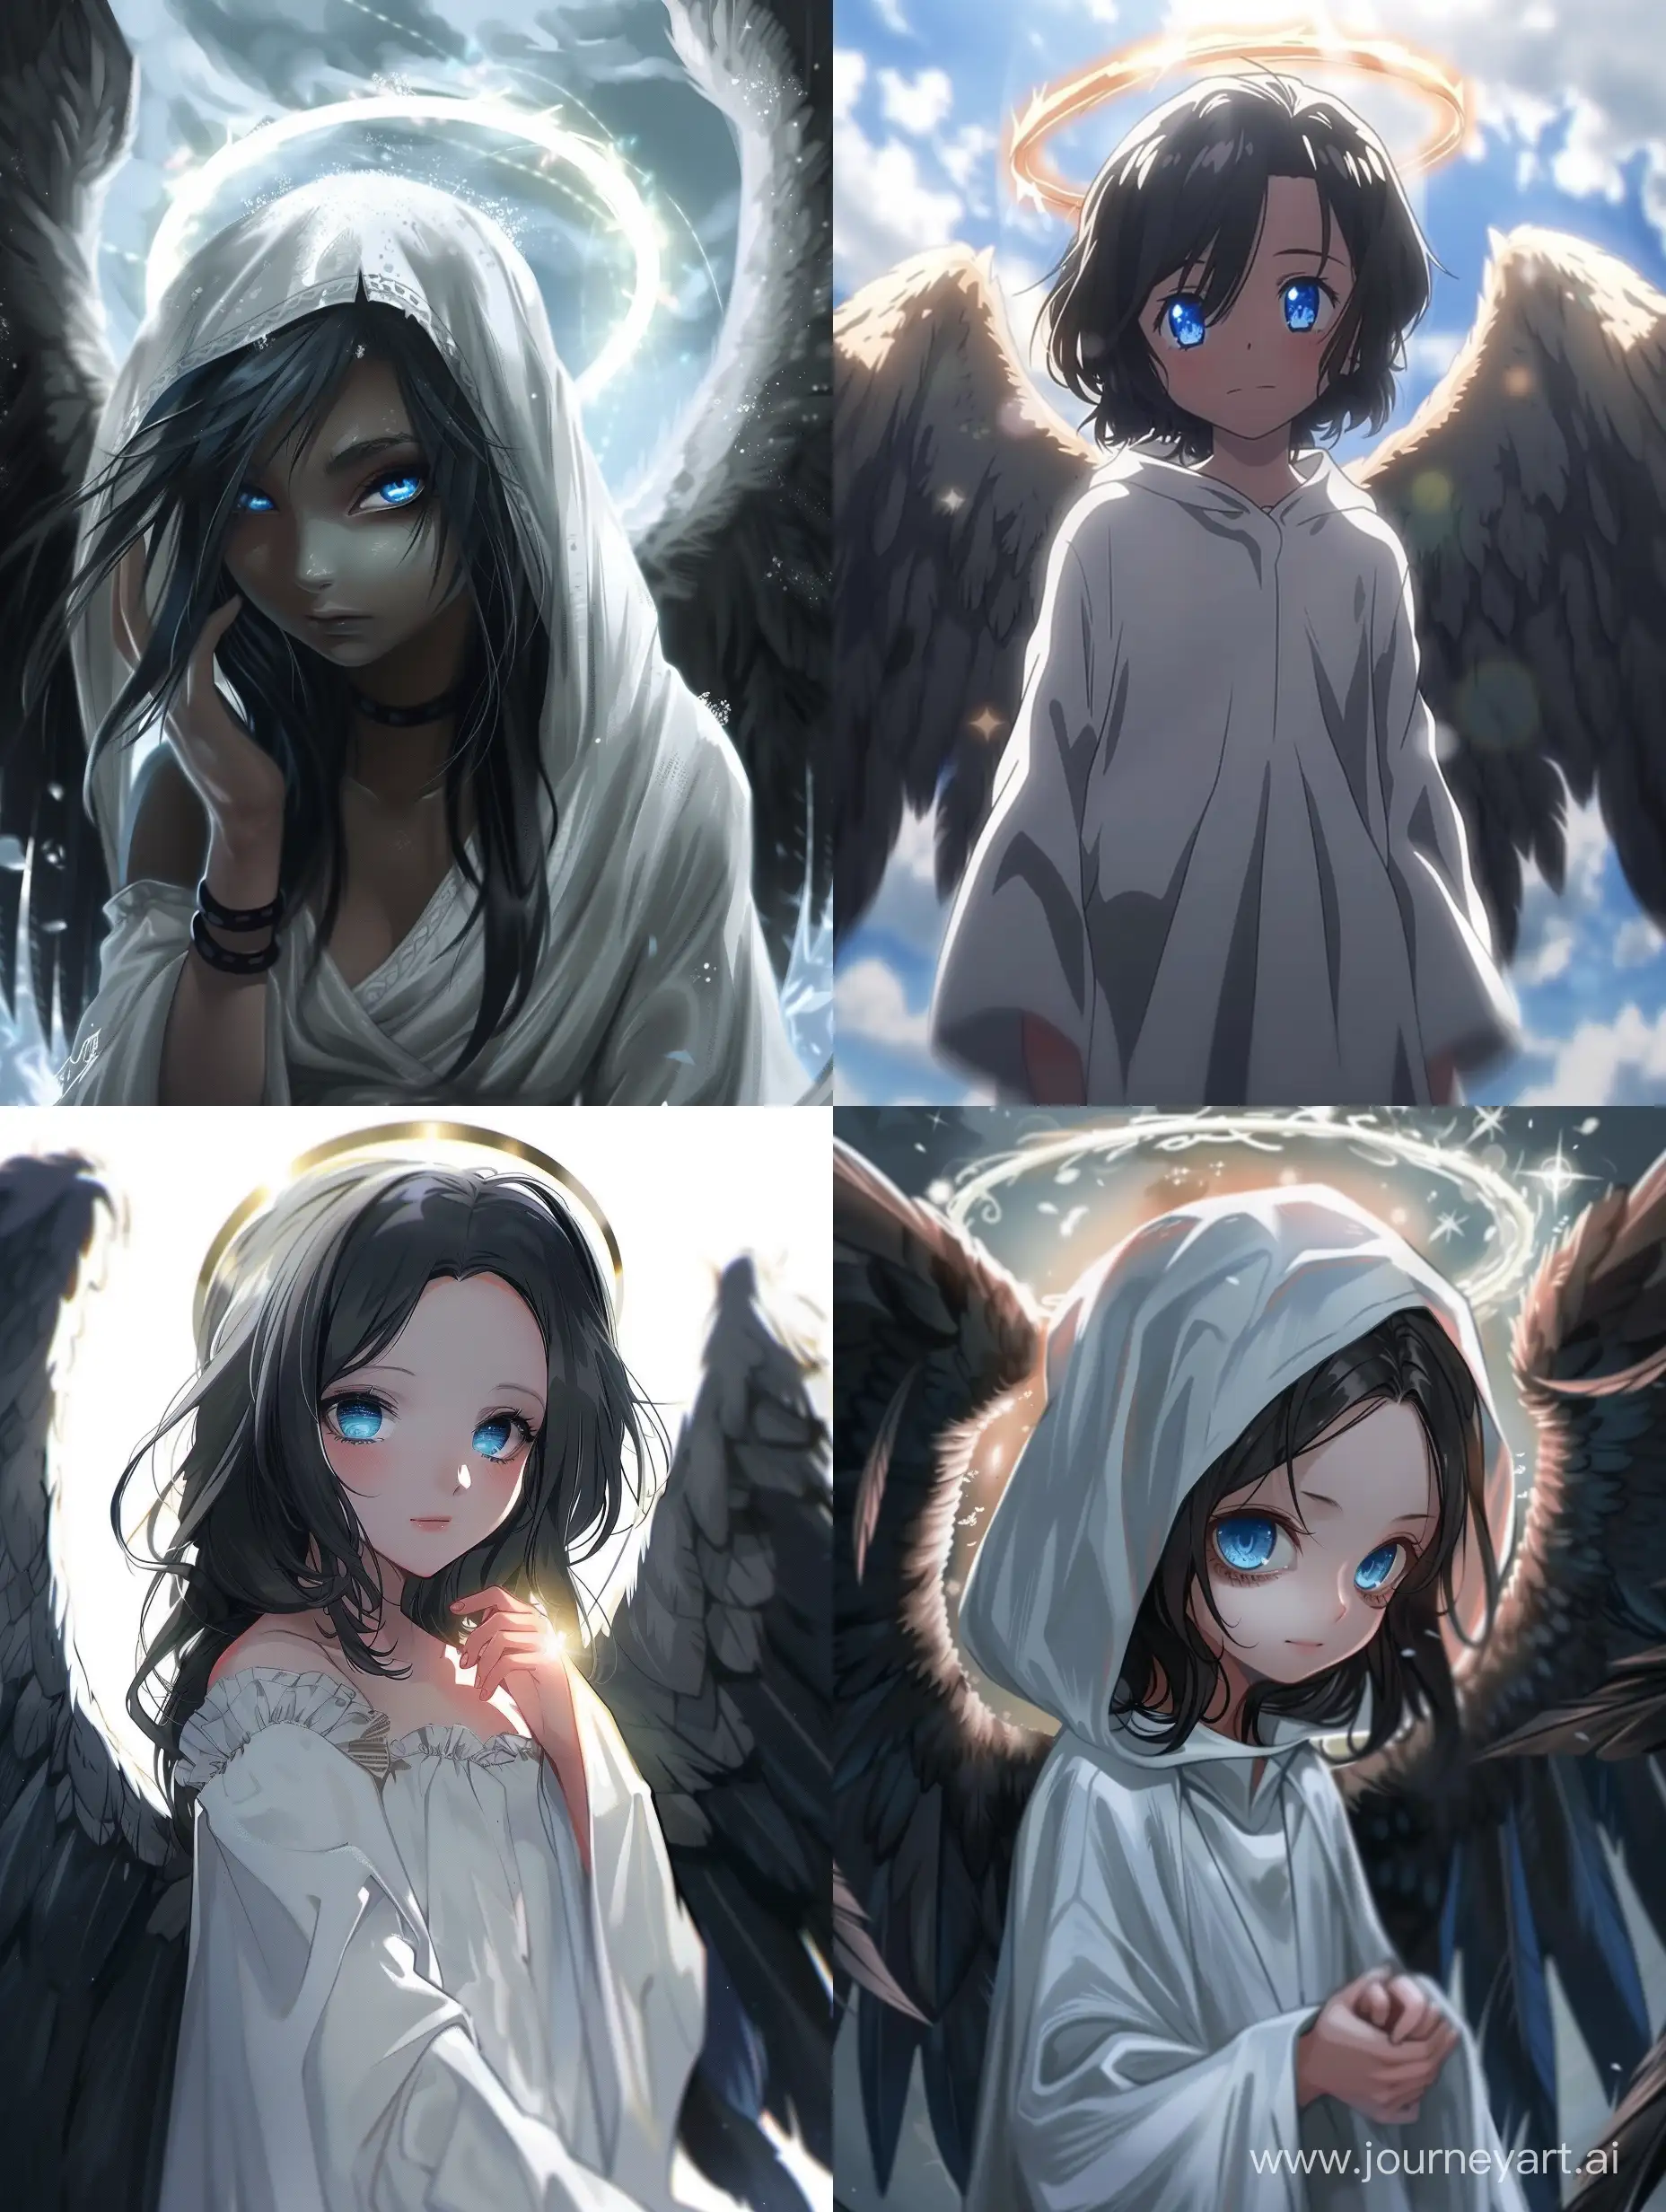 Anime rebel angel girl in white robe and shining halo, but with black wings and bright blue eyes